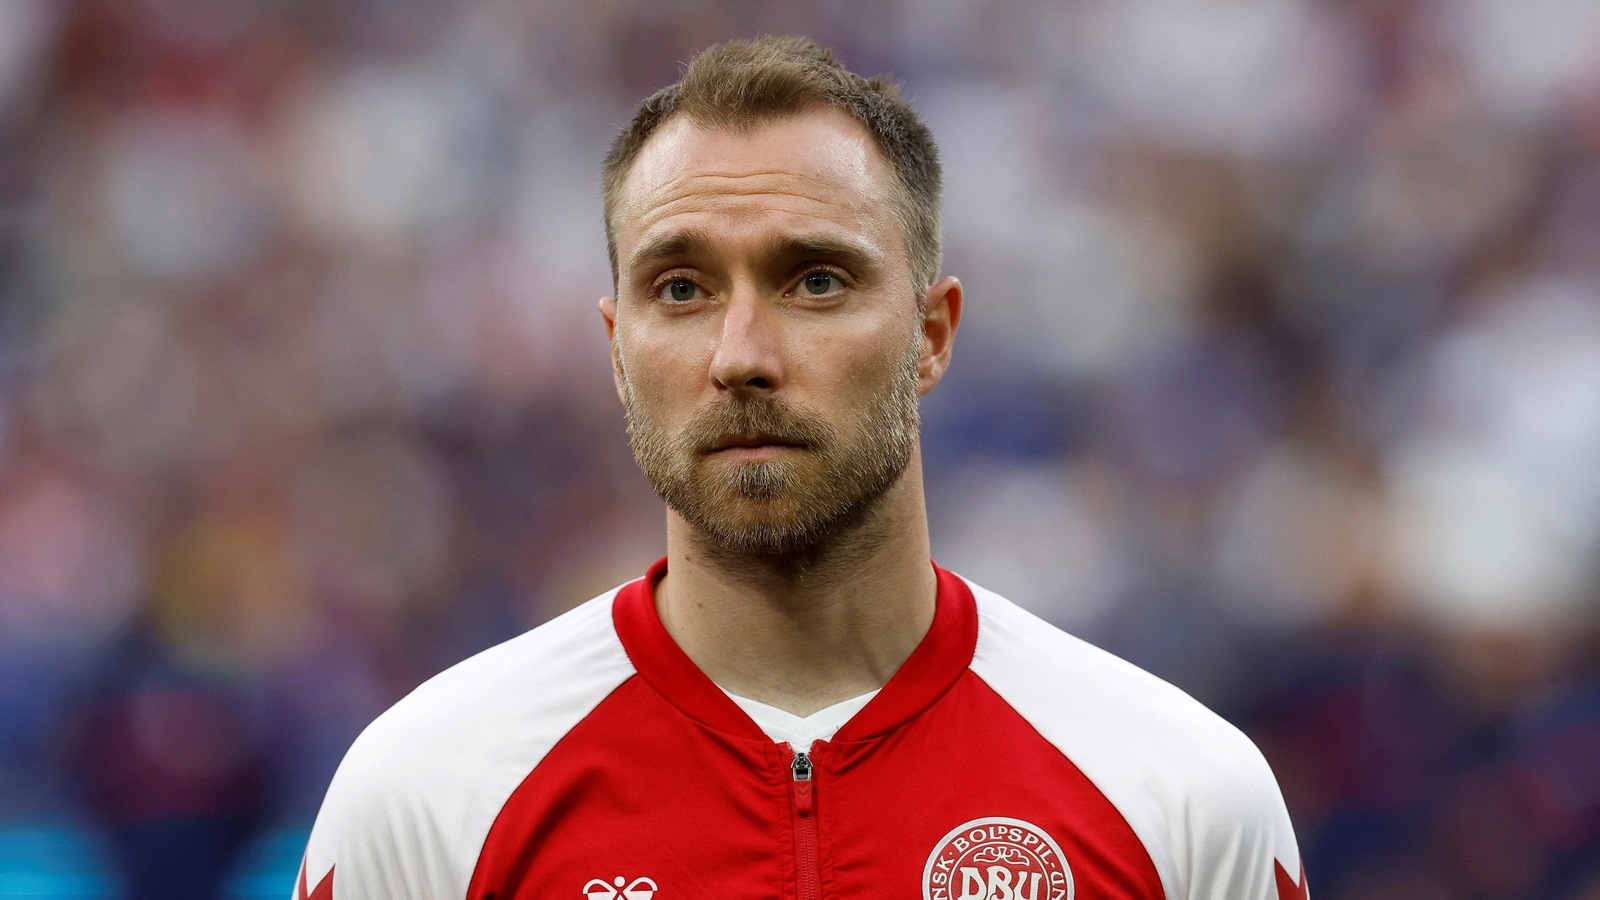 Manchester United sign Christian Eriksen to 3-year contract